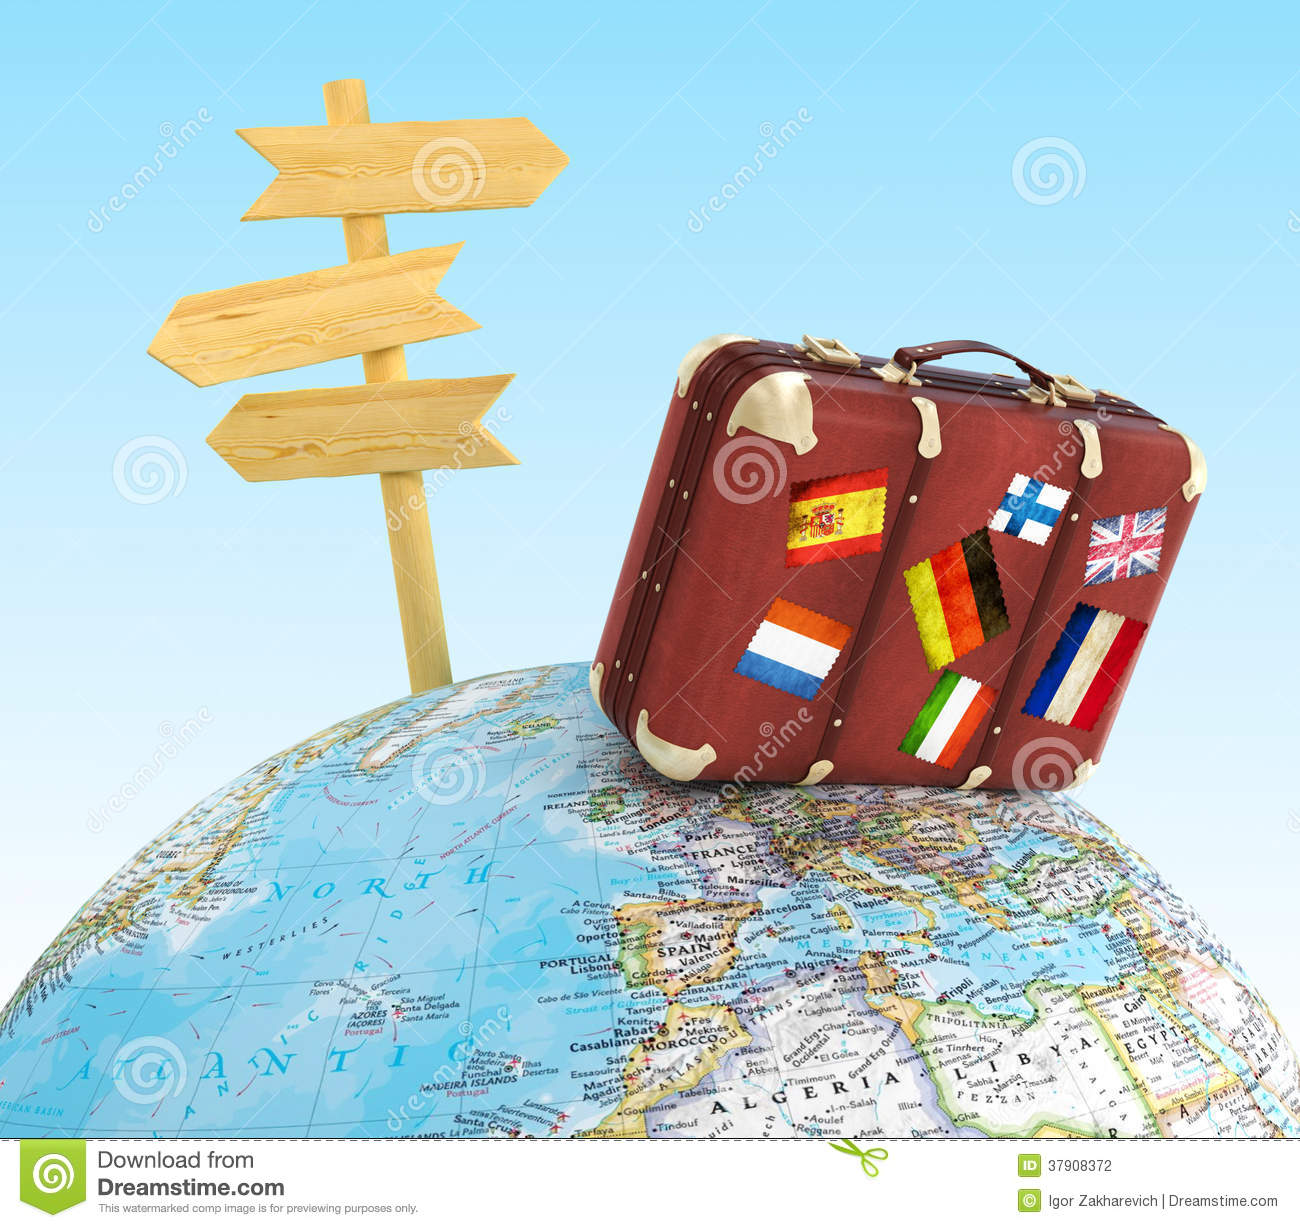 wood-sign-board-old-suitcase-striples-flags-blurred-world-map-sky-background-37908372